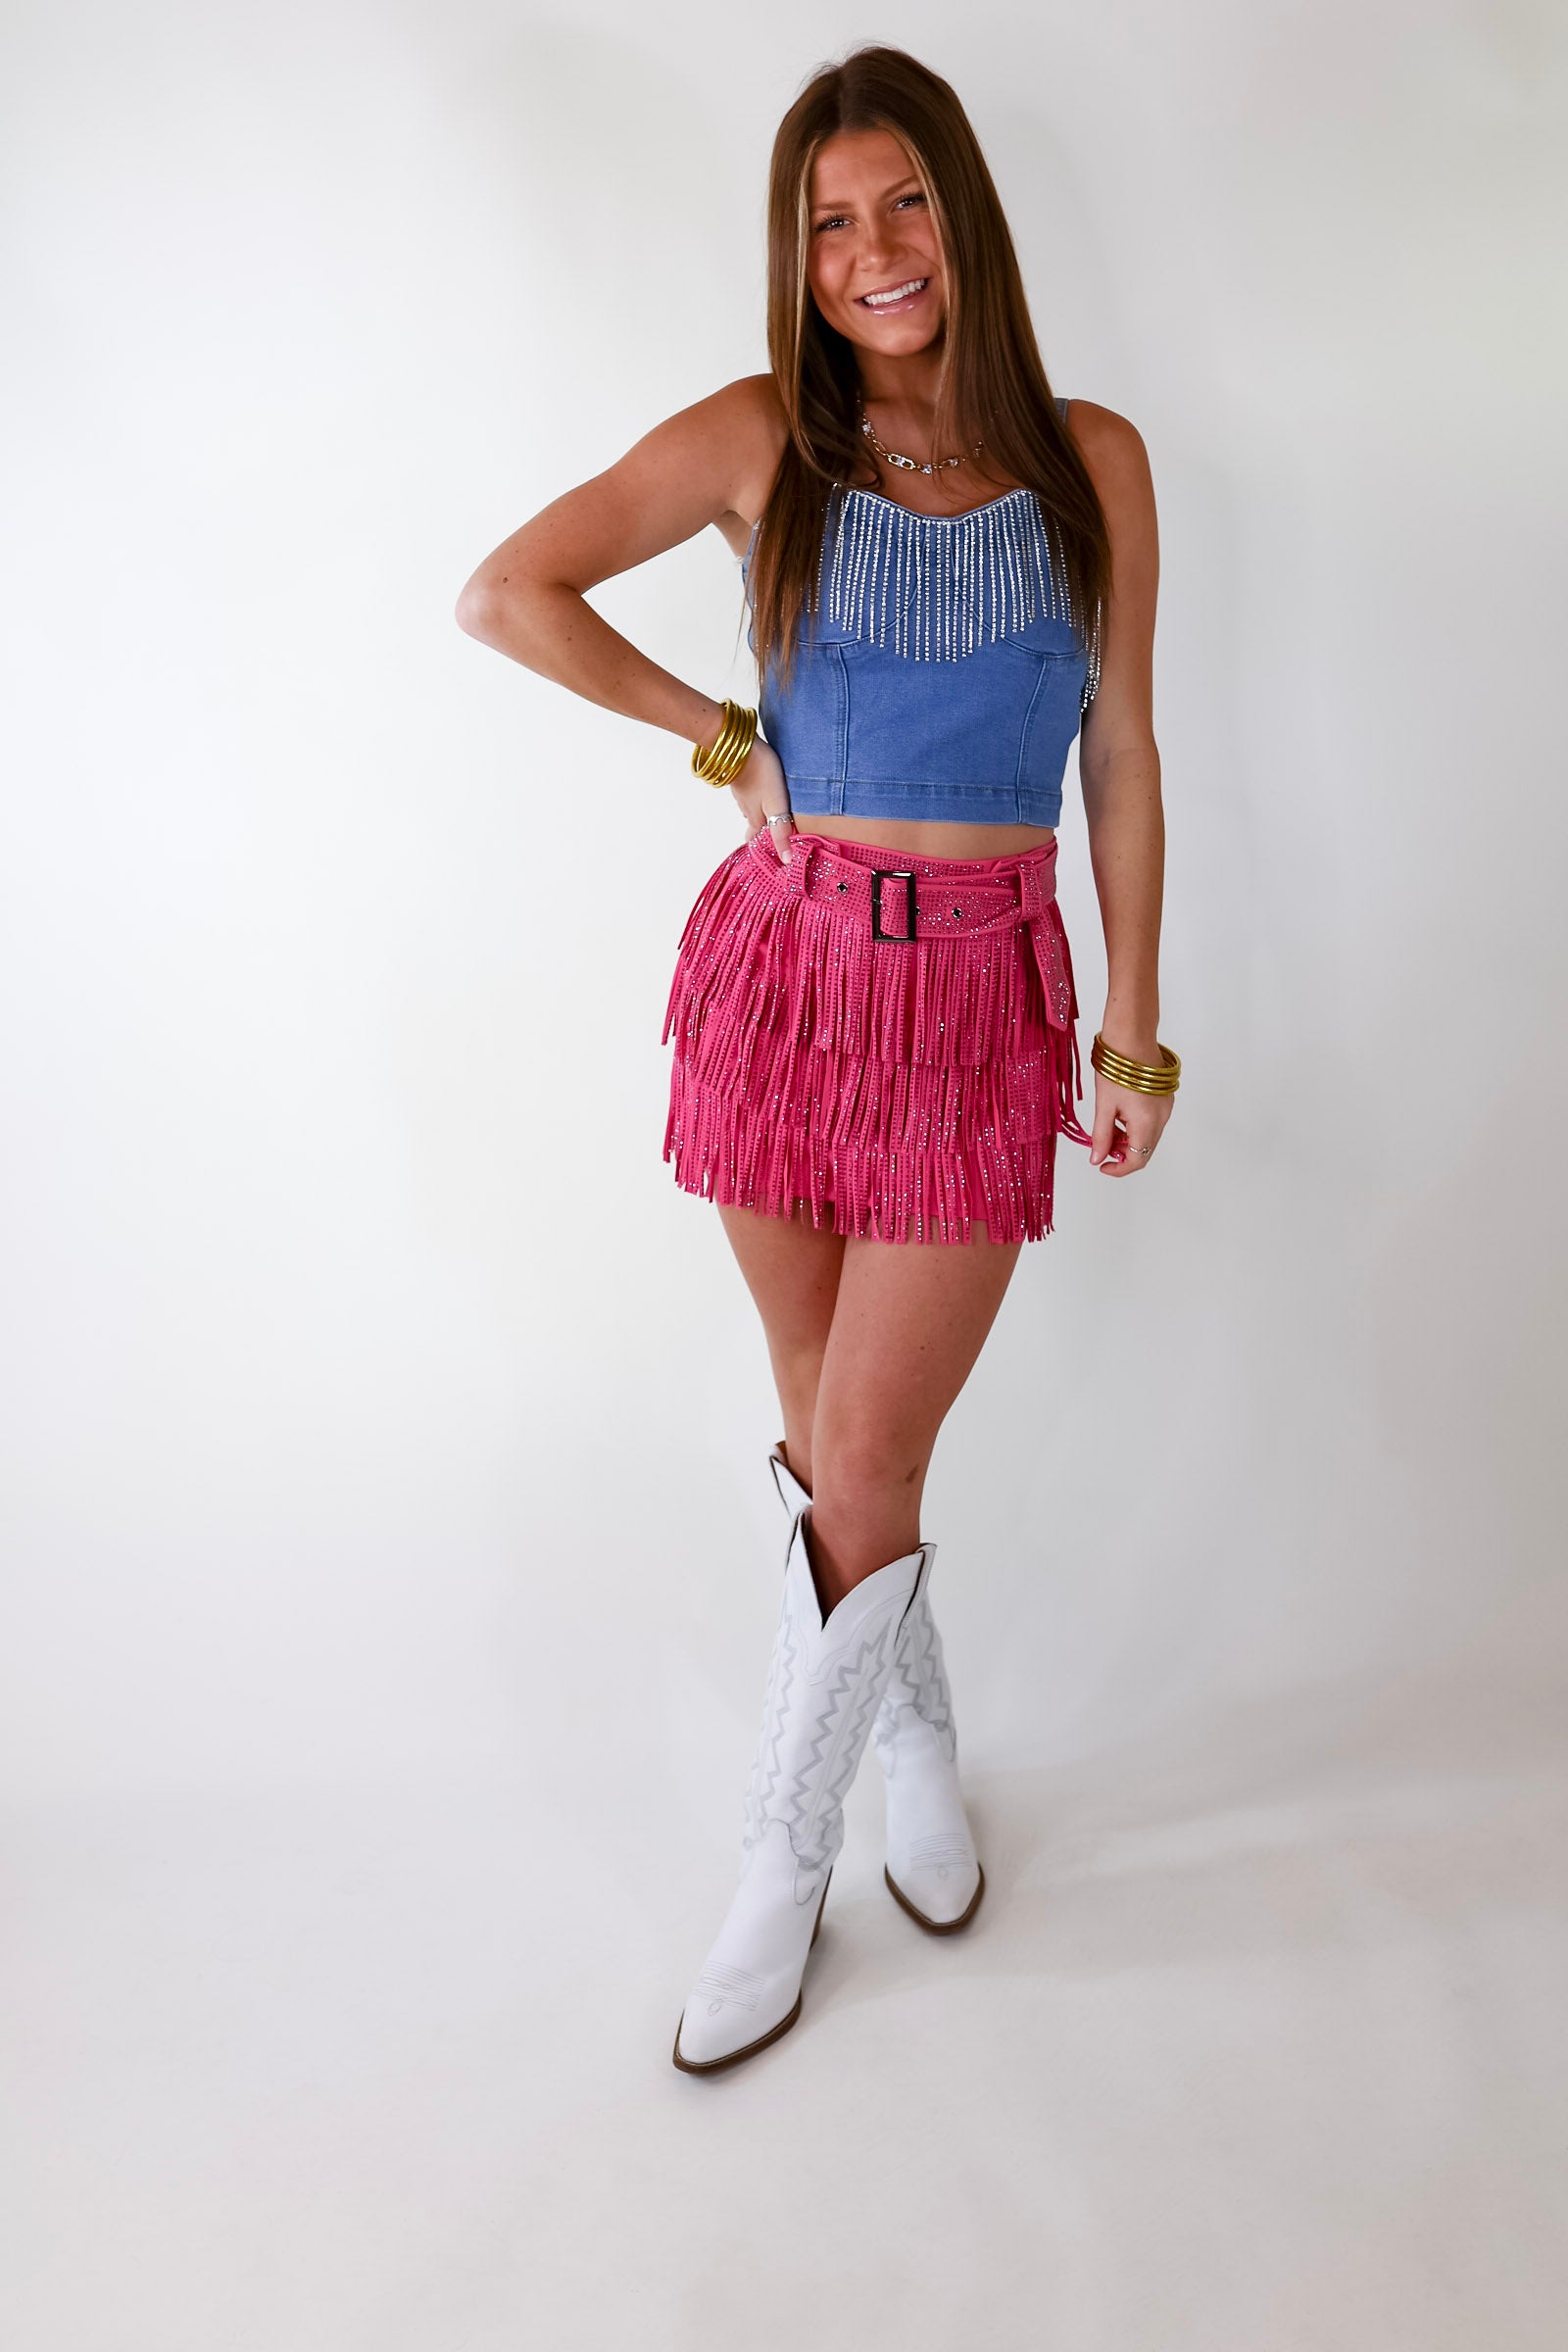 Broadway Lights Crystal Fringe Crop Top with Spaghetti Straps in Denim